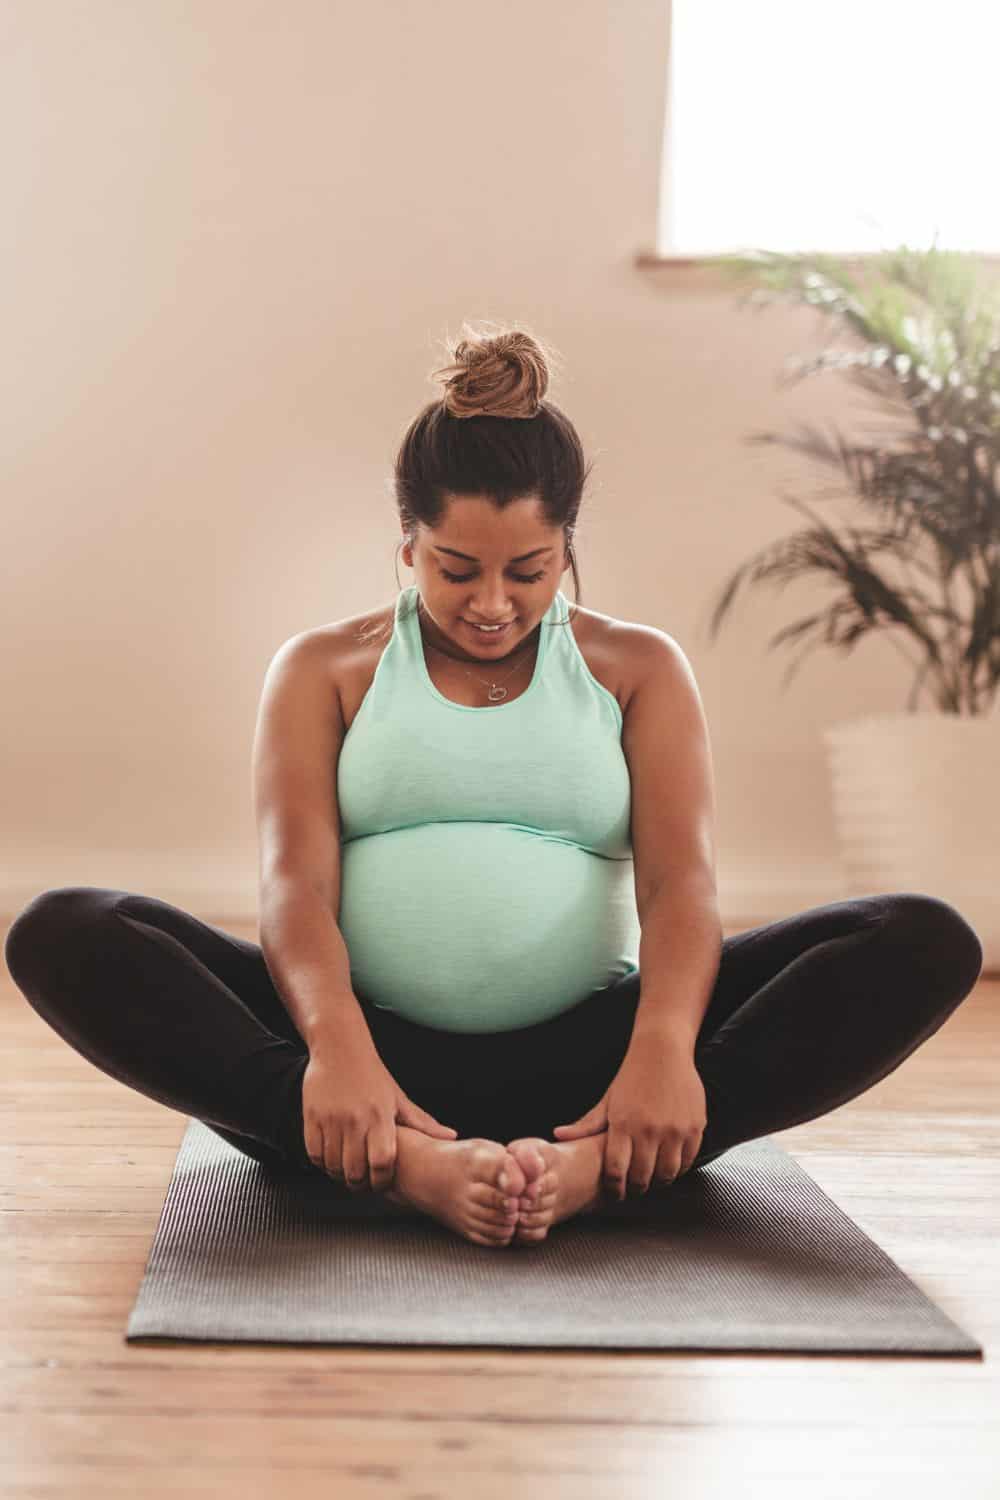 things to do while pregnant for fun - prenatal yoga